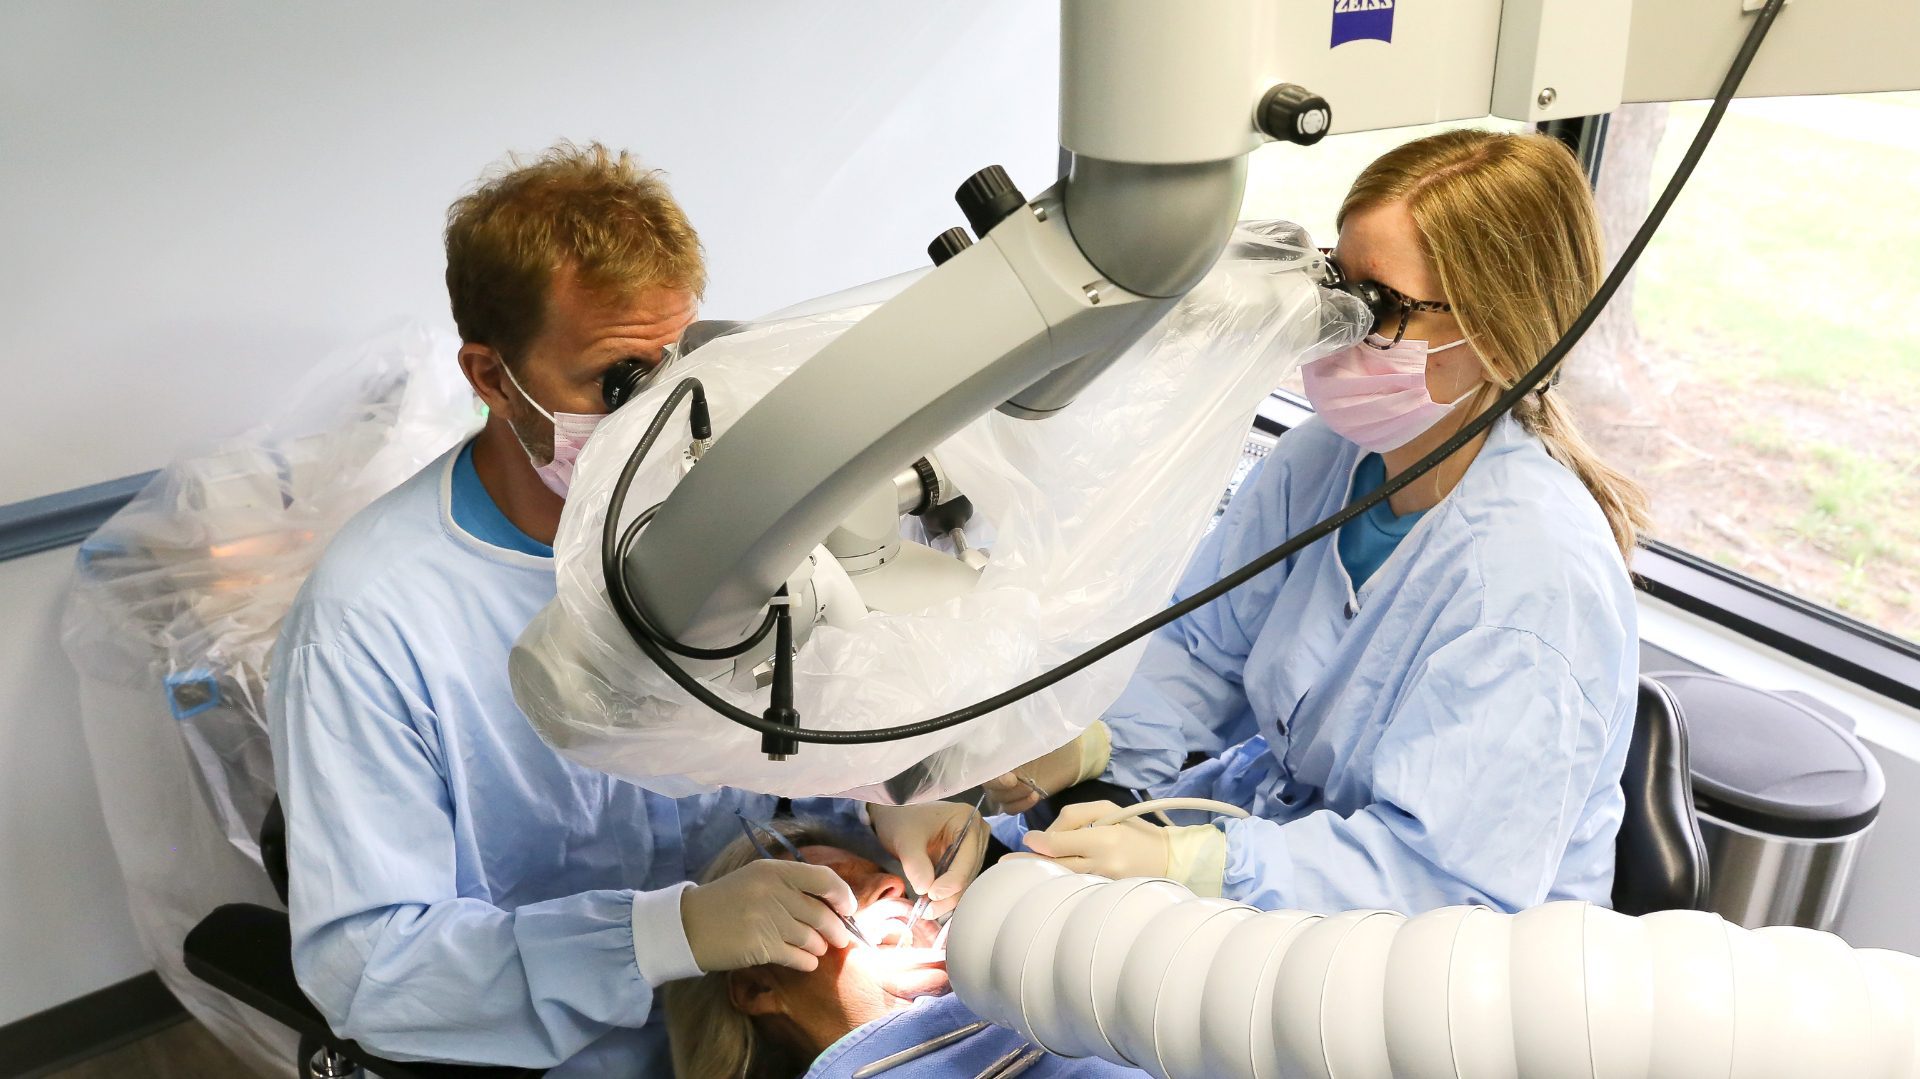 Dr. Cross examines a patient for dental implant placement.